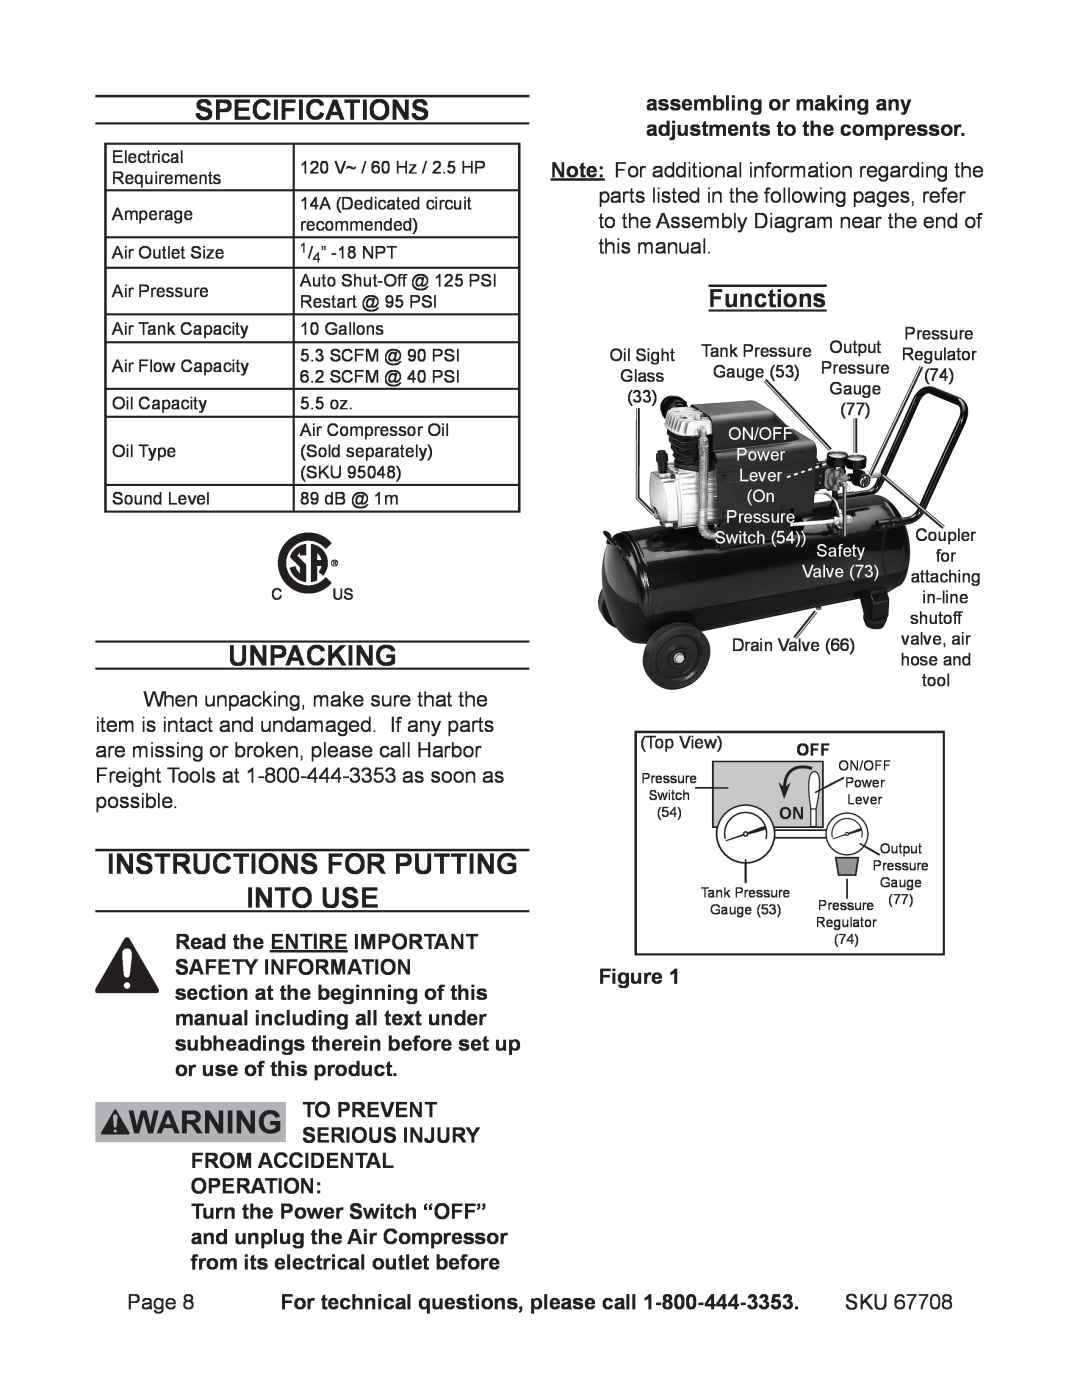 Harbor Freight Tools 67708 Specifications, Unpacking, Instructions for putting into use, On/Off, Power, Lever, Pressure 